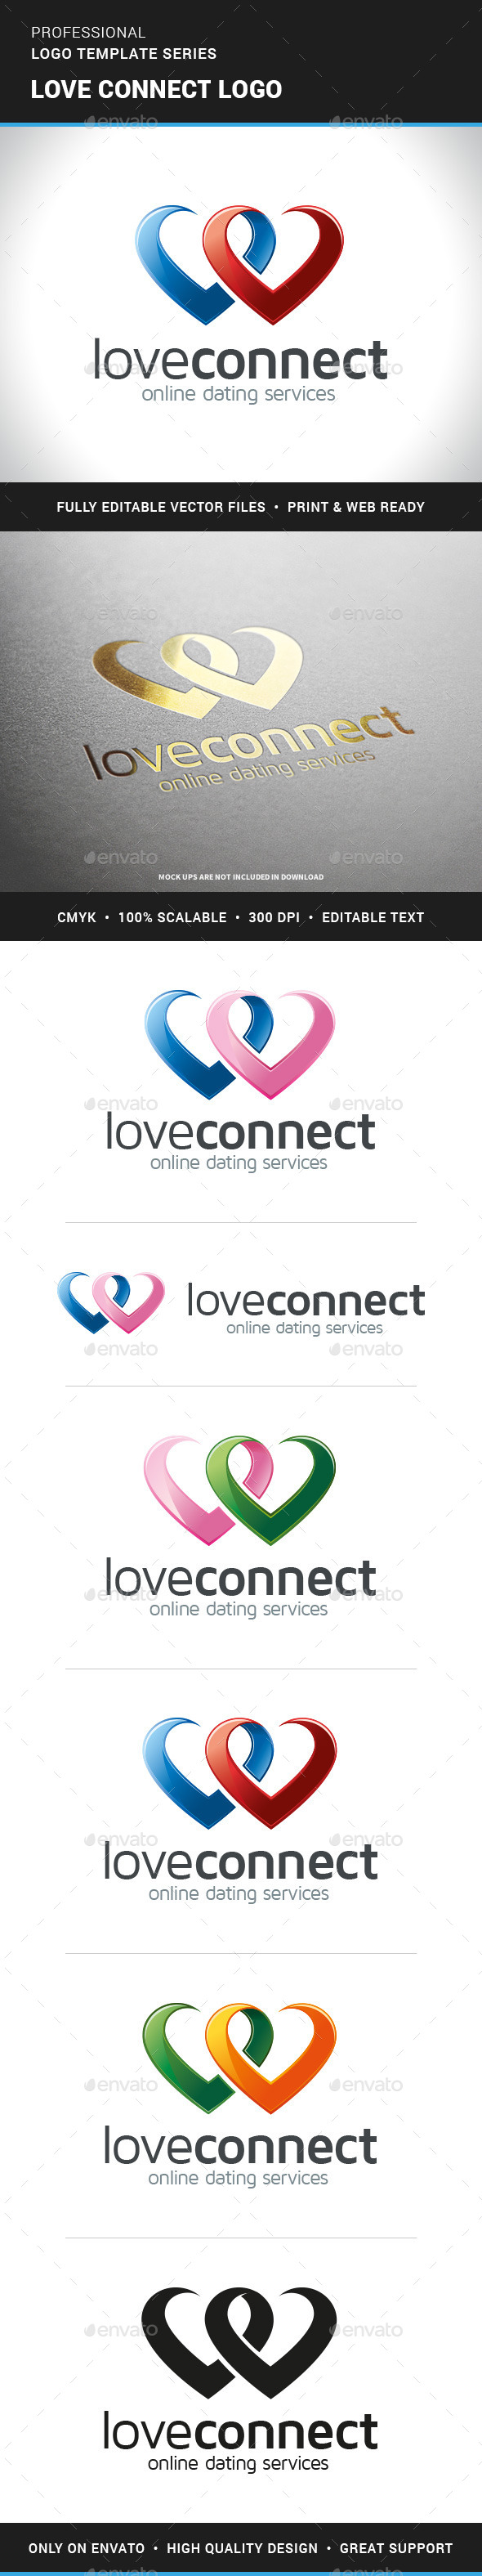 Love Connect Logo Template